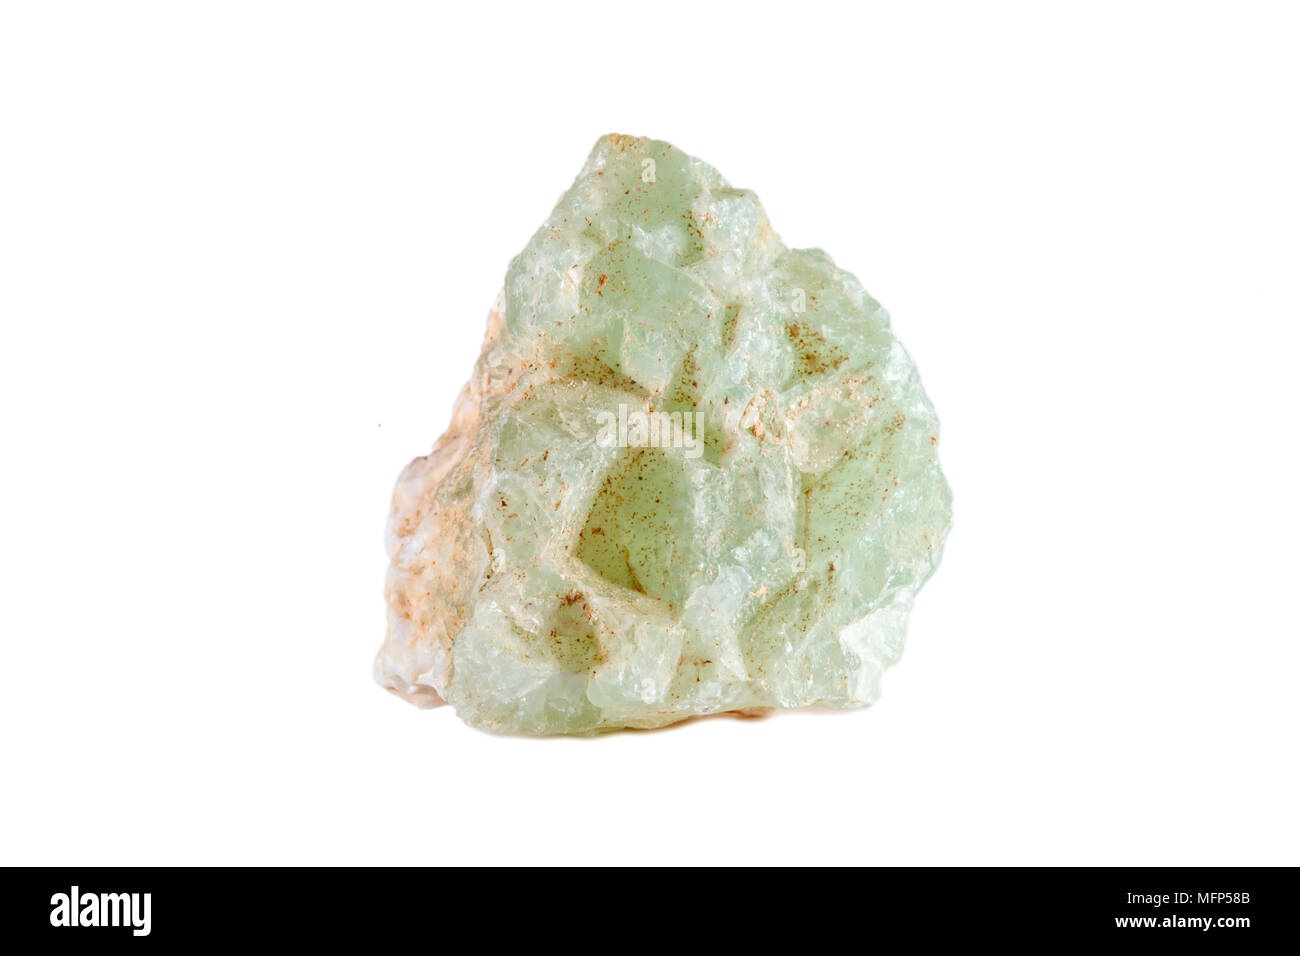 Macro shooting of natural gemstone. The raw mineral is prehnite. Isolated object on a white background. Stock Photo